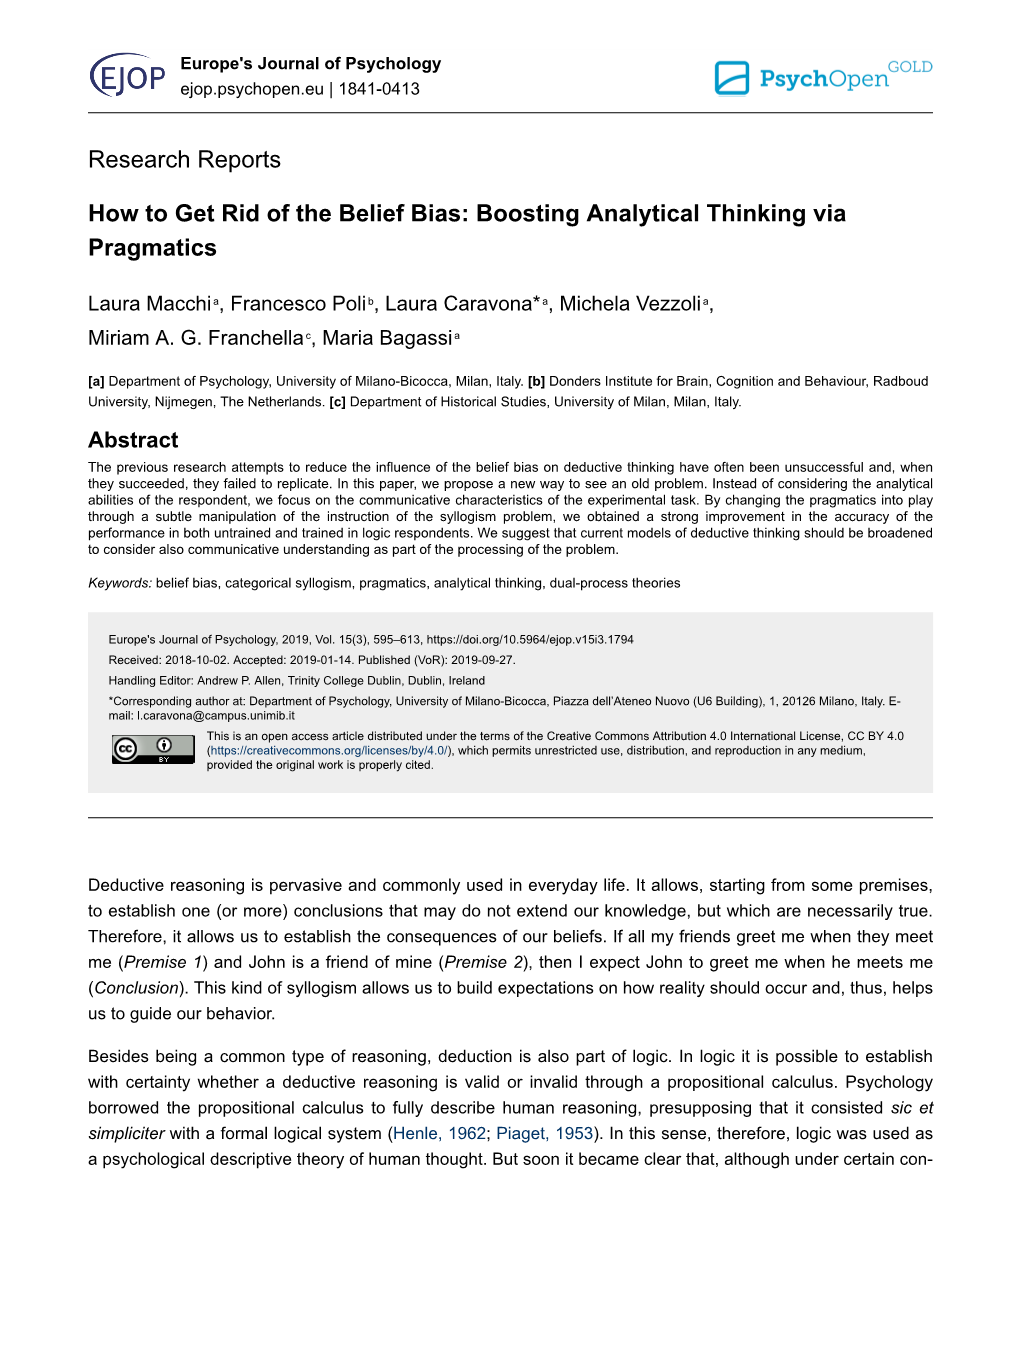 How to Get Rid of the Belief Bias: Boosting Analytical Thinking Via Pragmatics